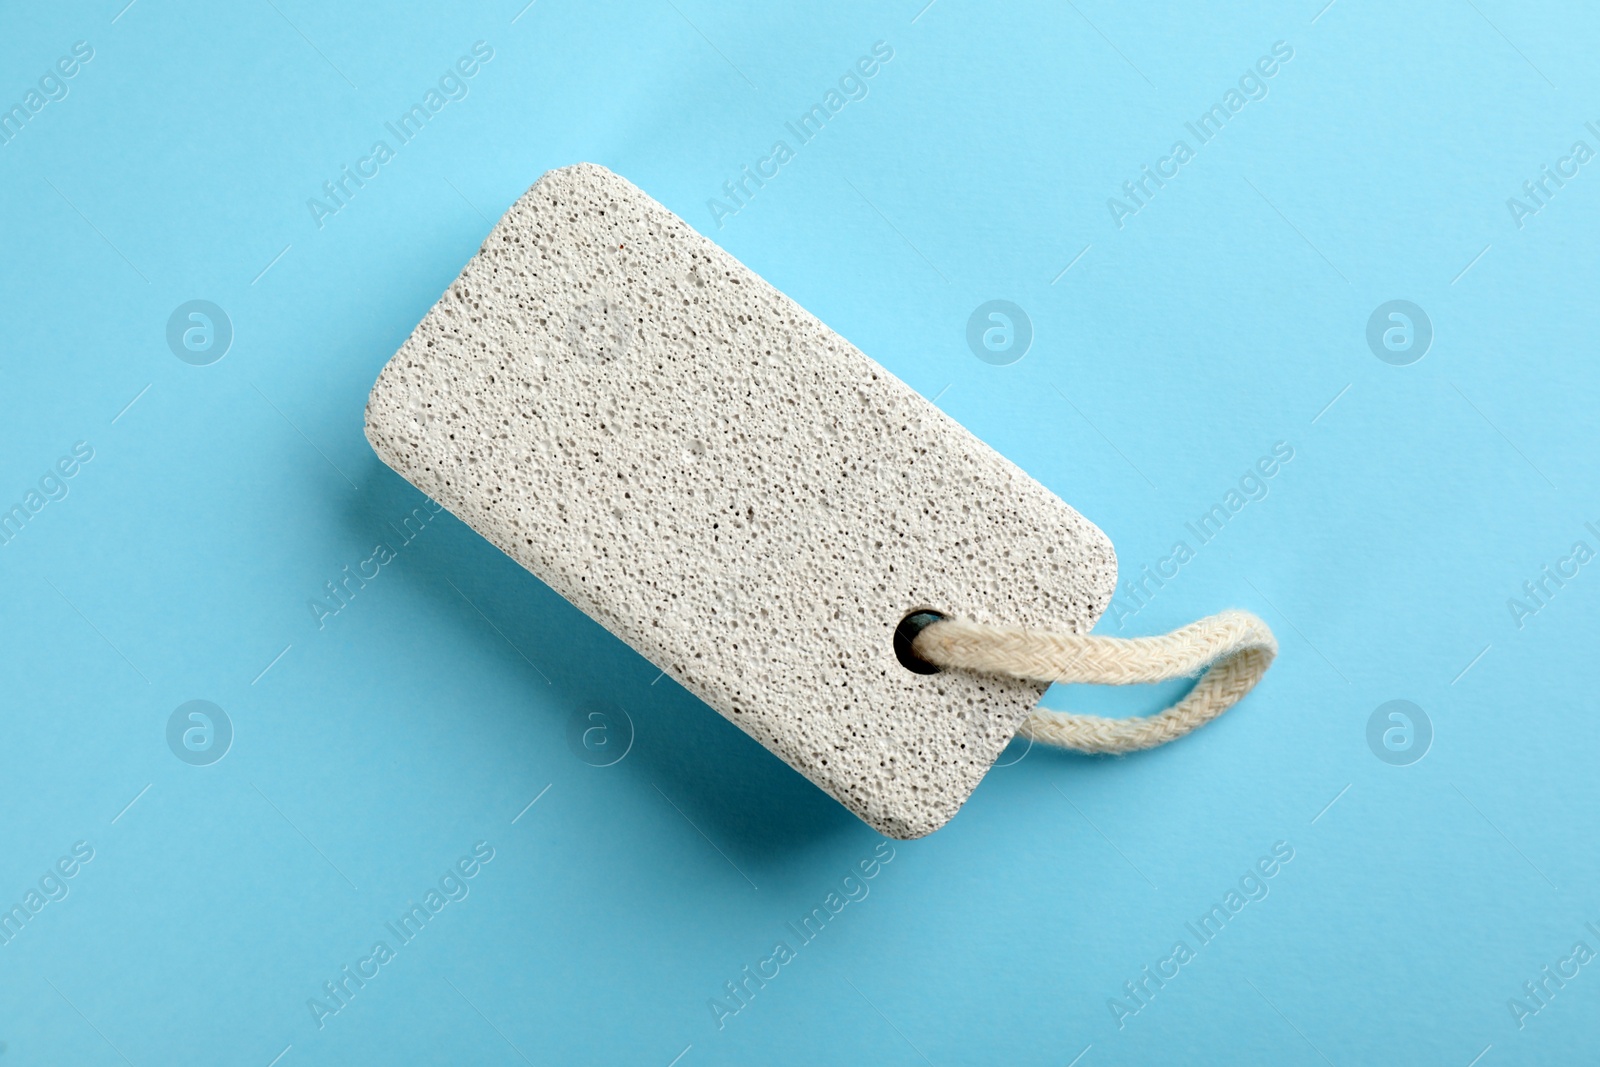 Photo of Pumice stone on light blue background, top view